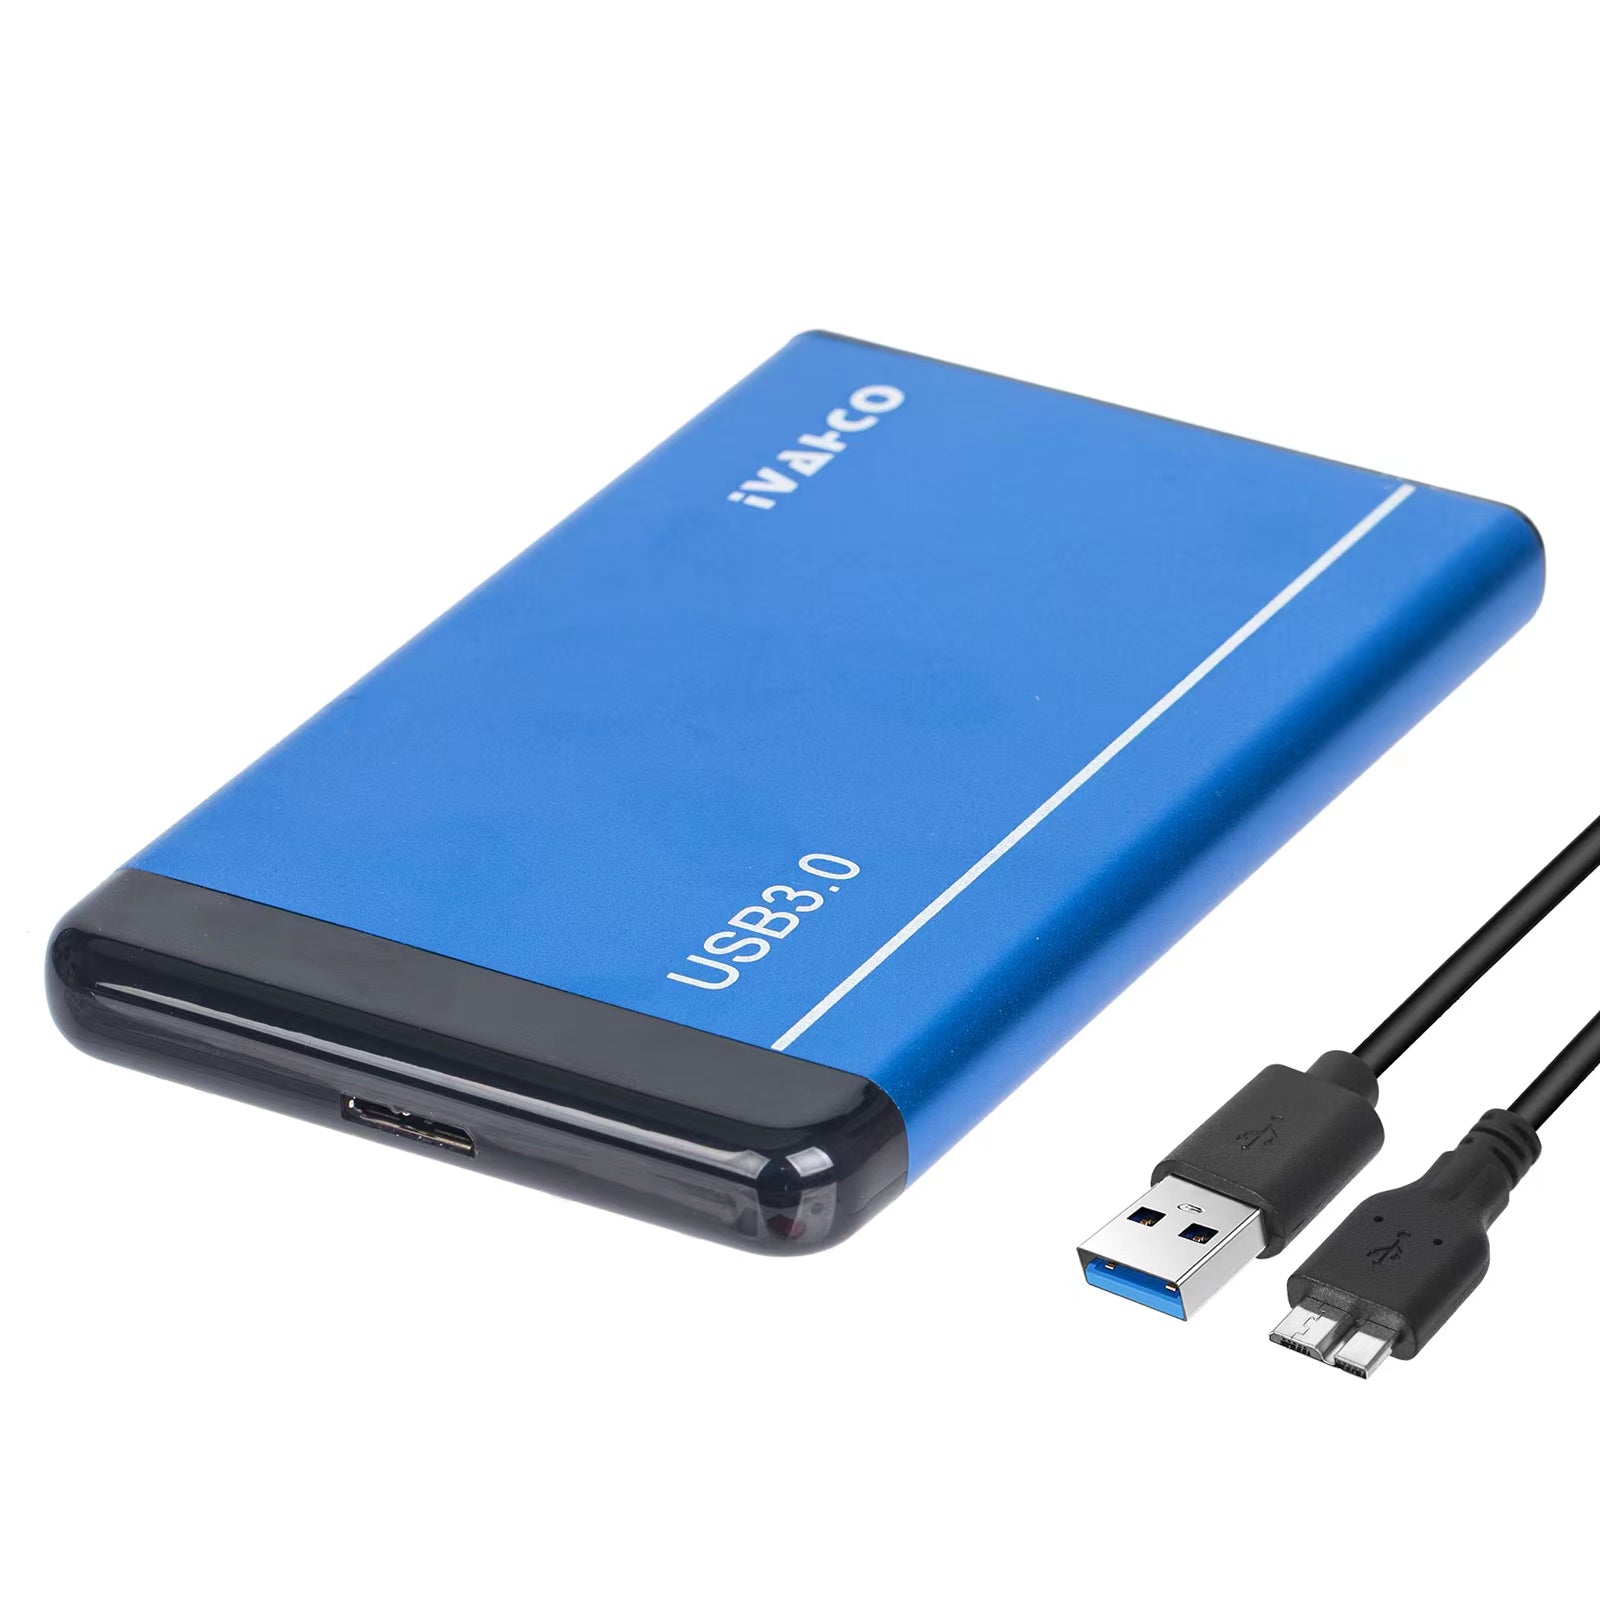 IVAHCO 500GB 2.5" Portable USB3.0 Hard Disk Enclosure Matte HDD External Case Hard Drive Box with Data Cable - Blue